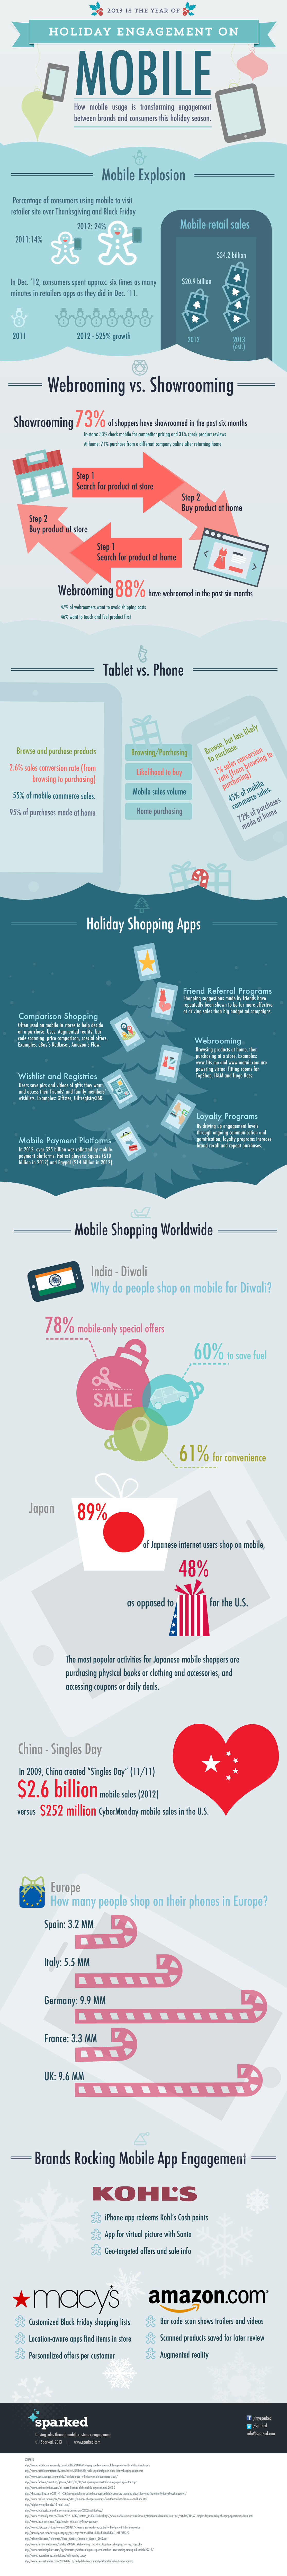 mobile-holiday-shopping-infographic